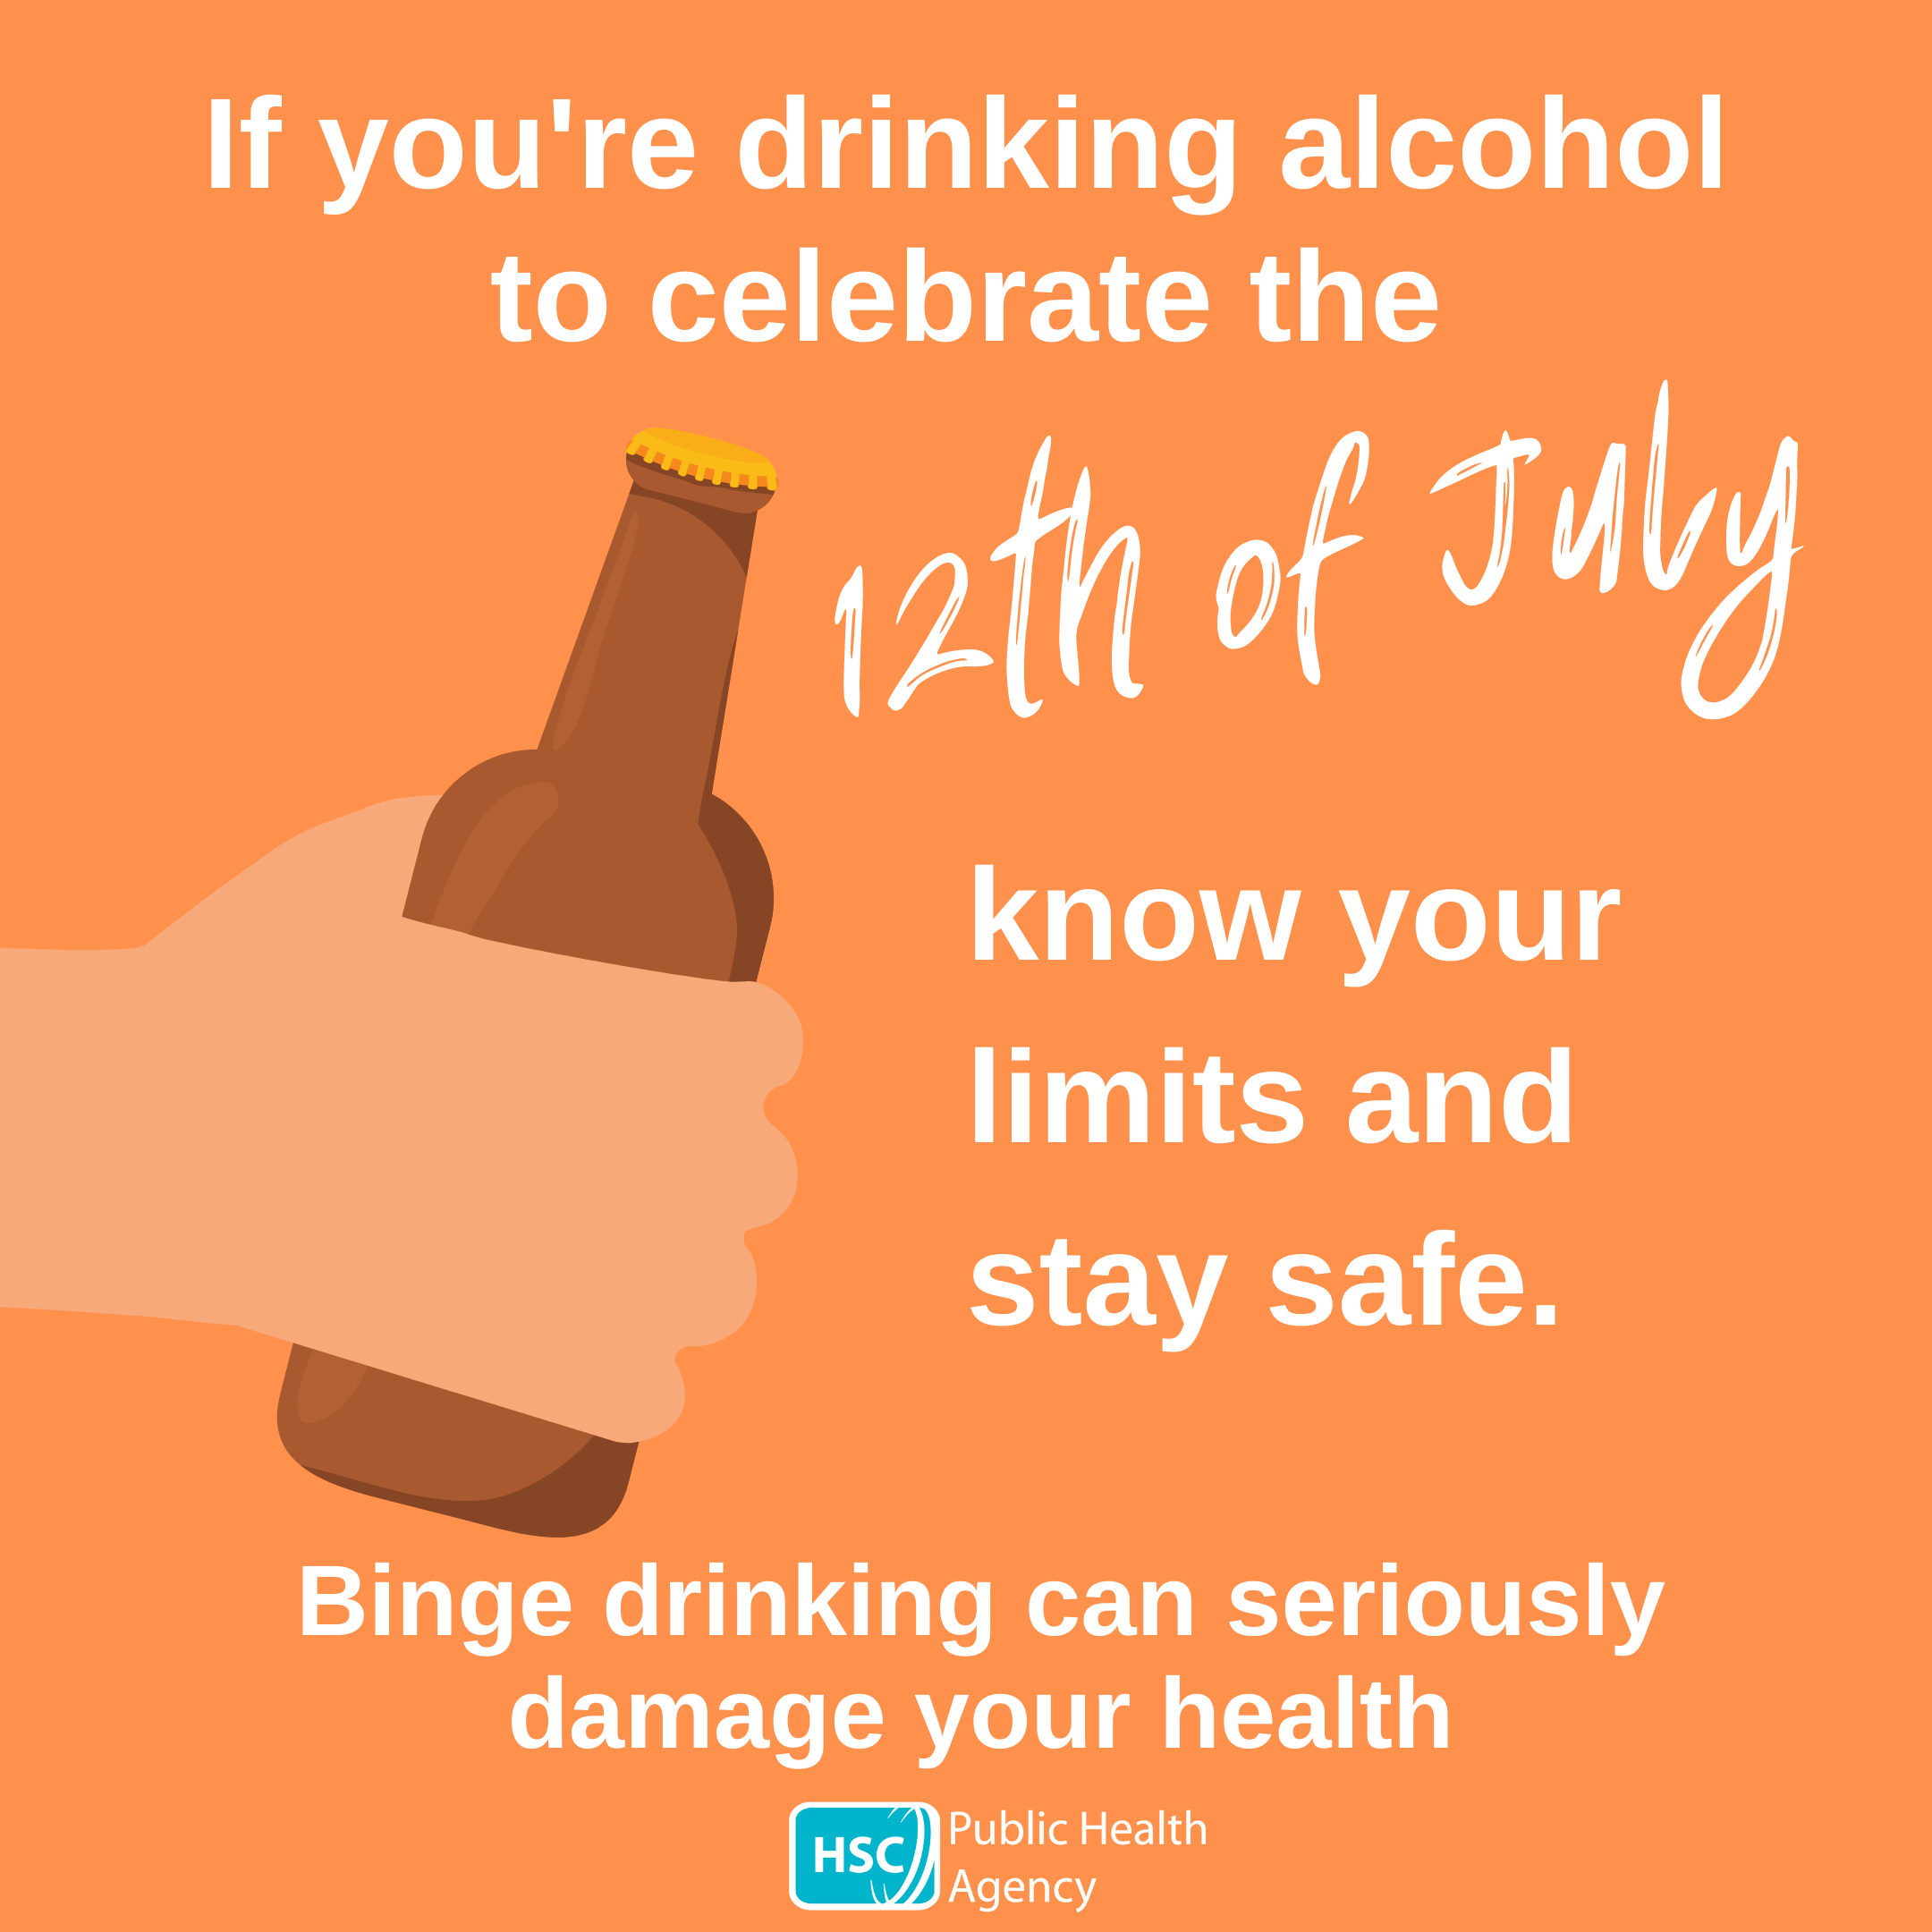 Image shows a cartoon hand holding a bottle of beer and says: If you're drinking alcohol to celebrate the 12th of July know your limits and stay safe.